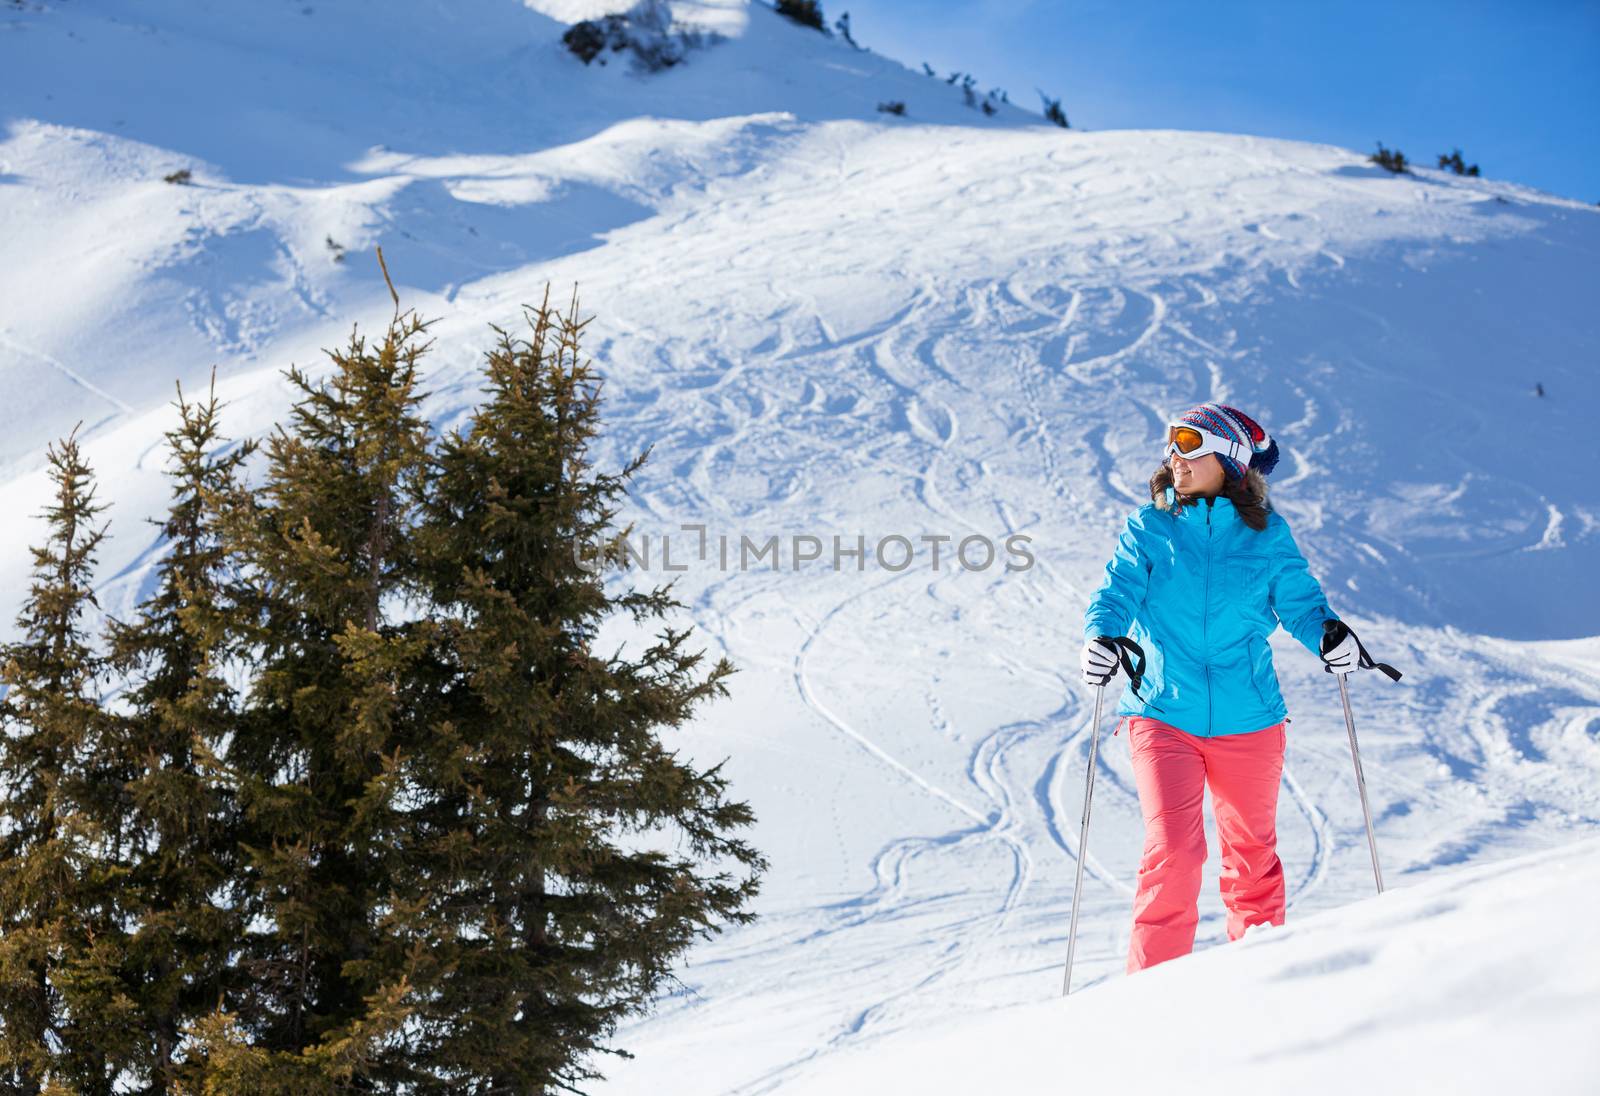 Ski, winter, snow, skiers, sun and fun - Middle Aged Woman On Ski Holiday In Mountains